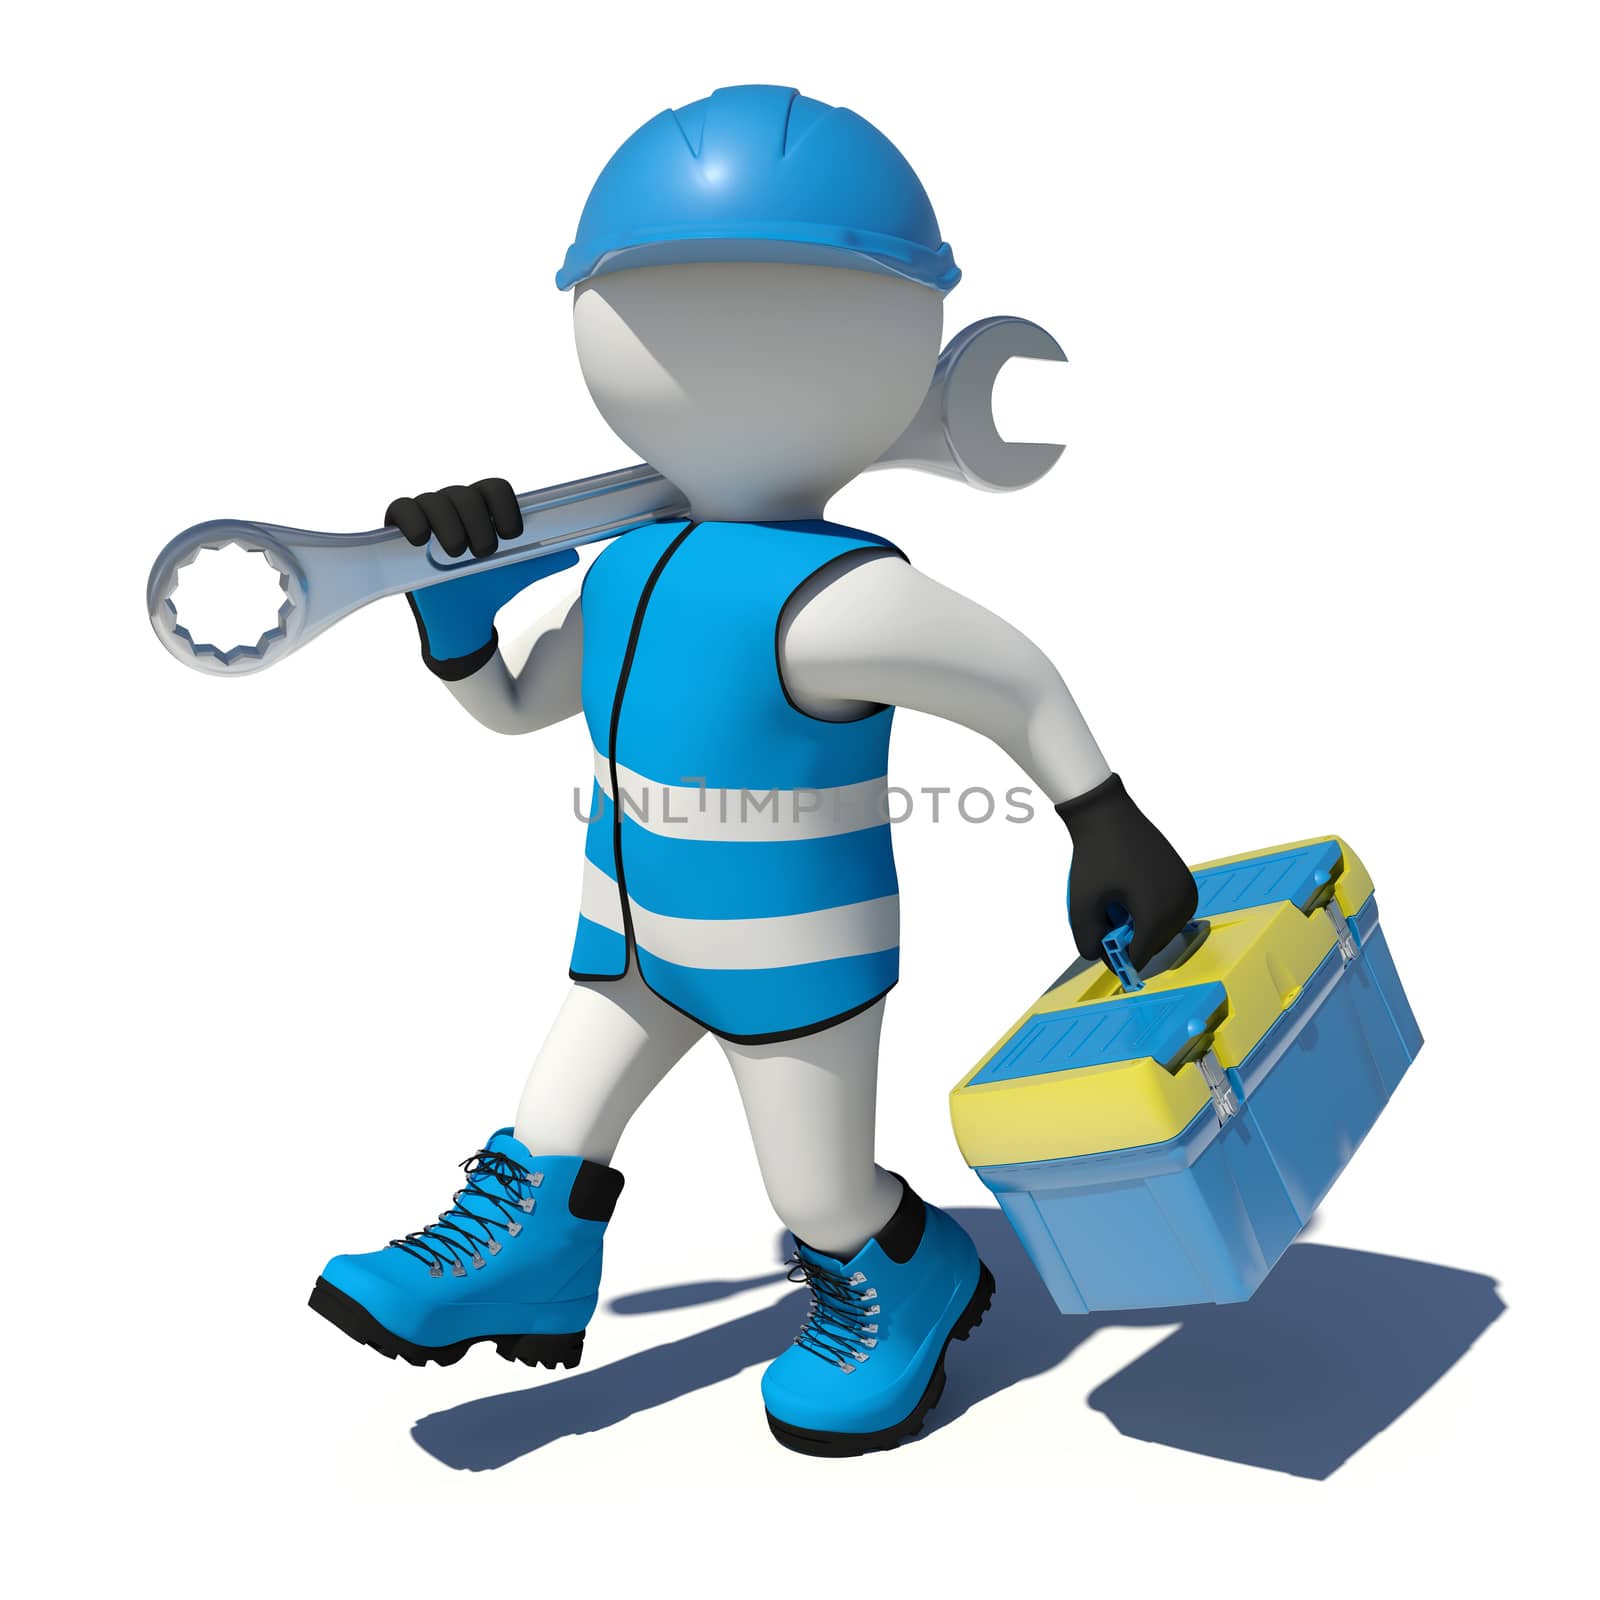 Walking worker in overalls holding tool box and wrench on his shoulder. Looking at camera. Isolated render on white background